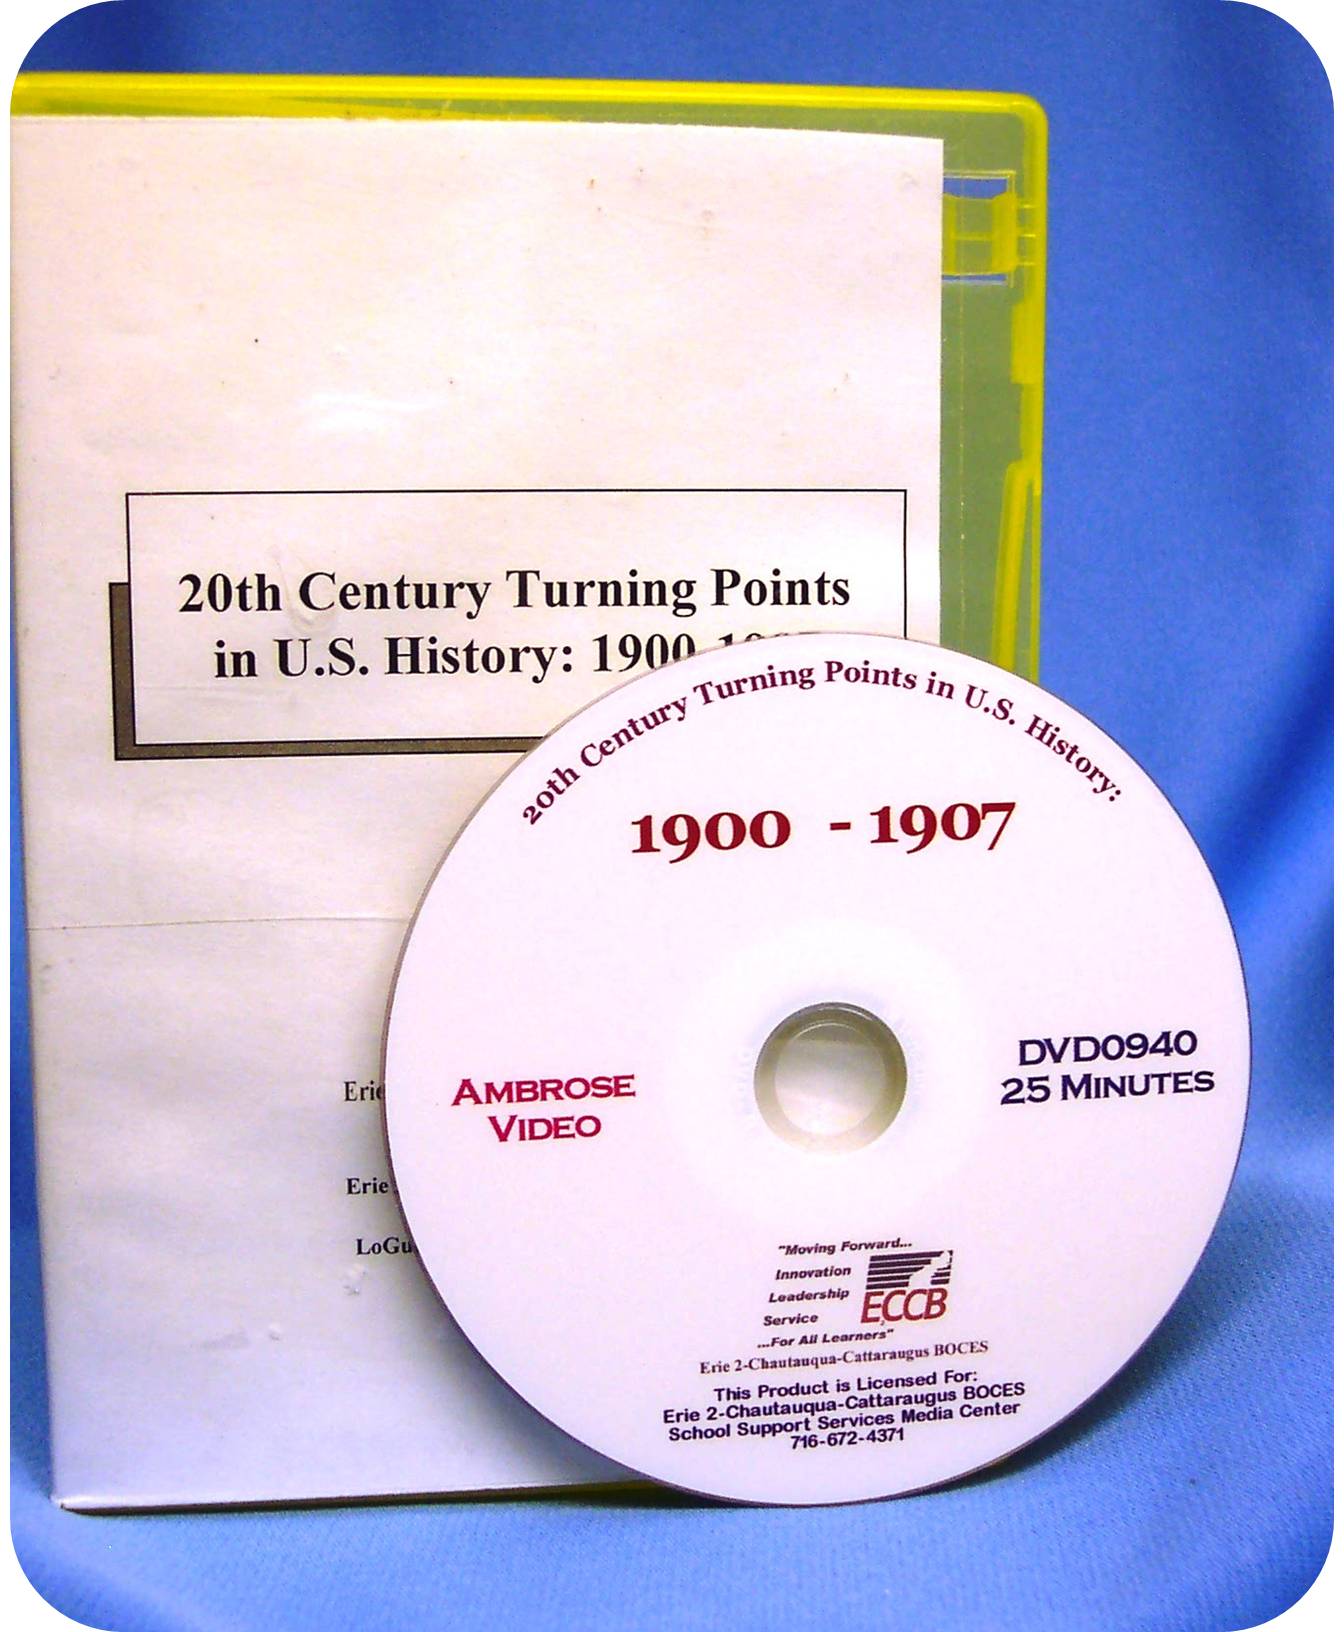 20th Century Turning Points in U.S. History: 1900-1907